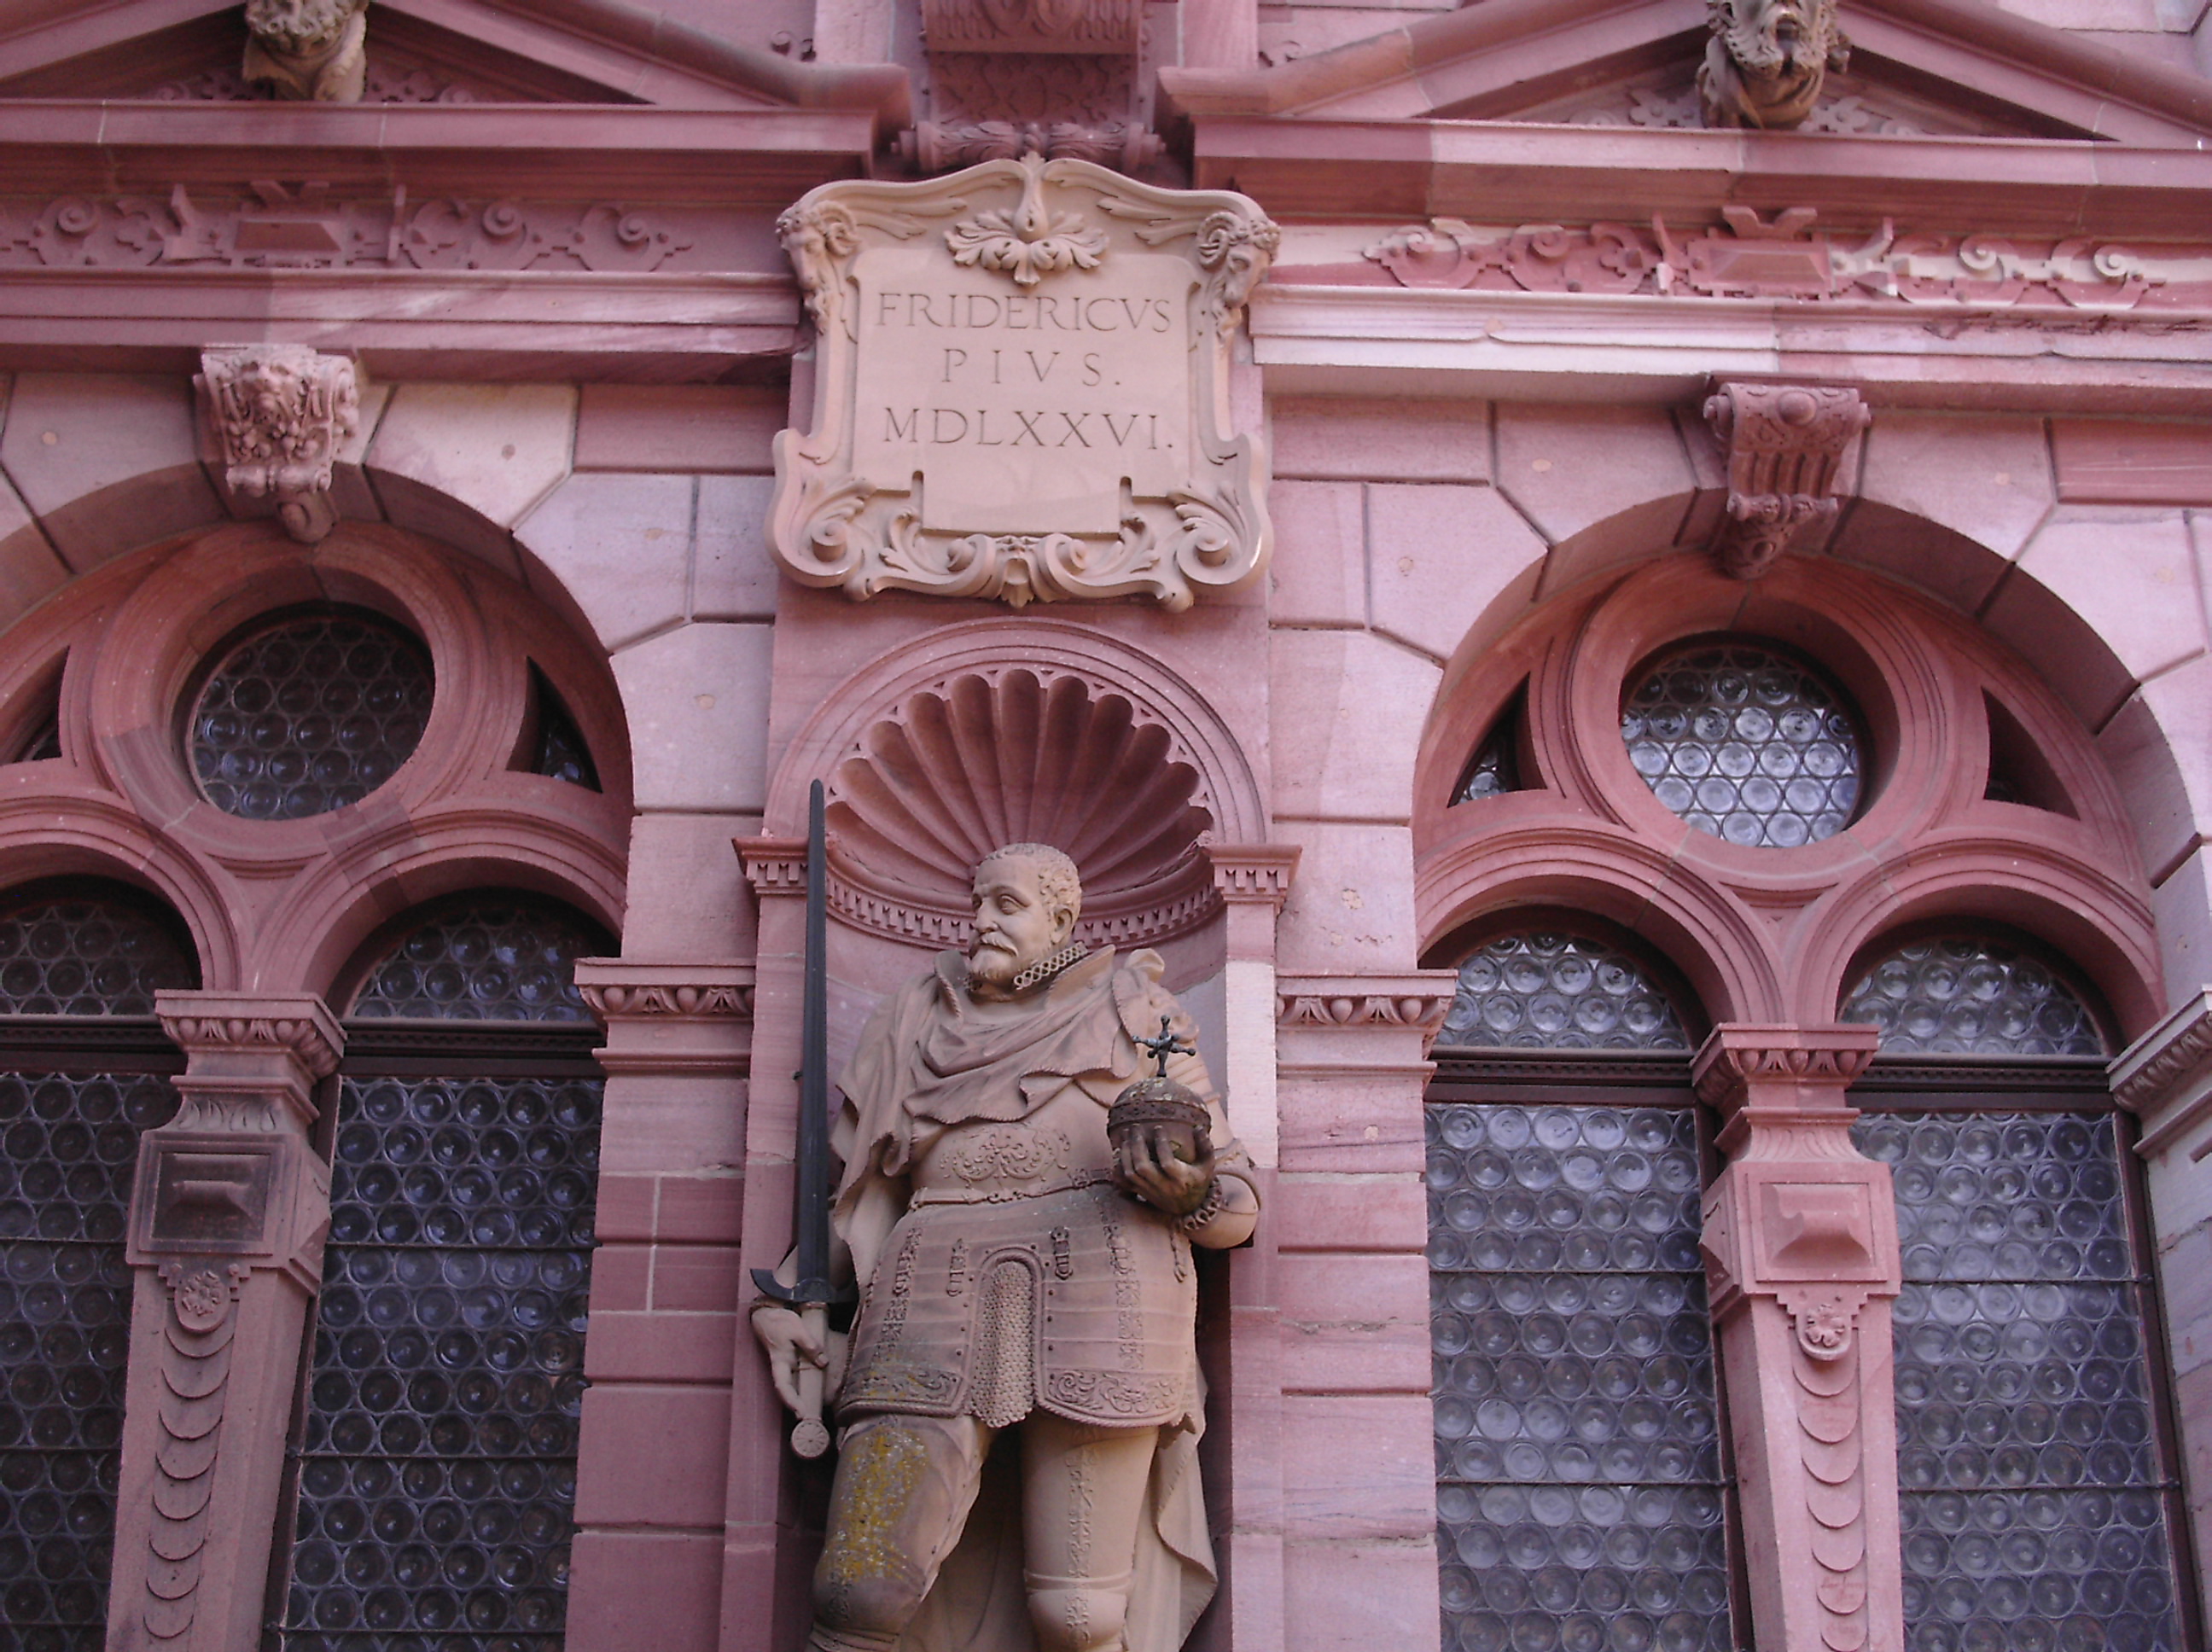 Statue of Elector Frederick III (aka Frederick the Pious) at Heidelberg Castle